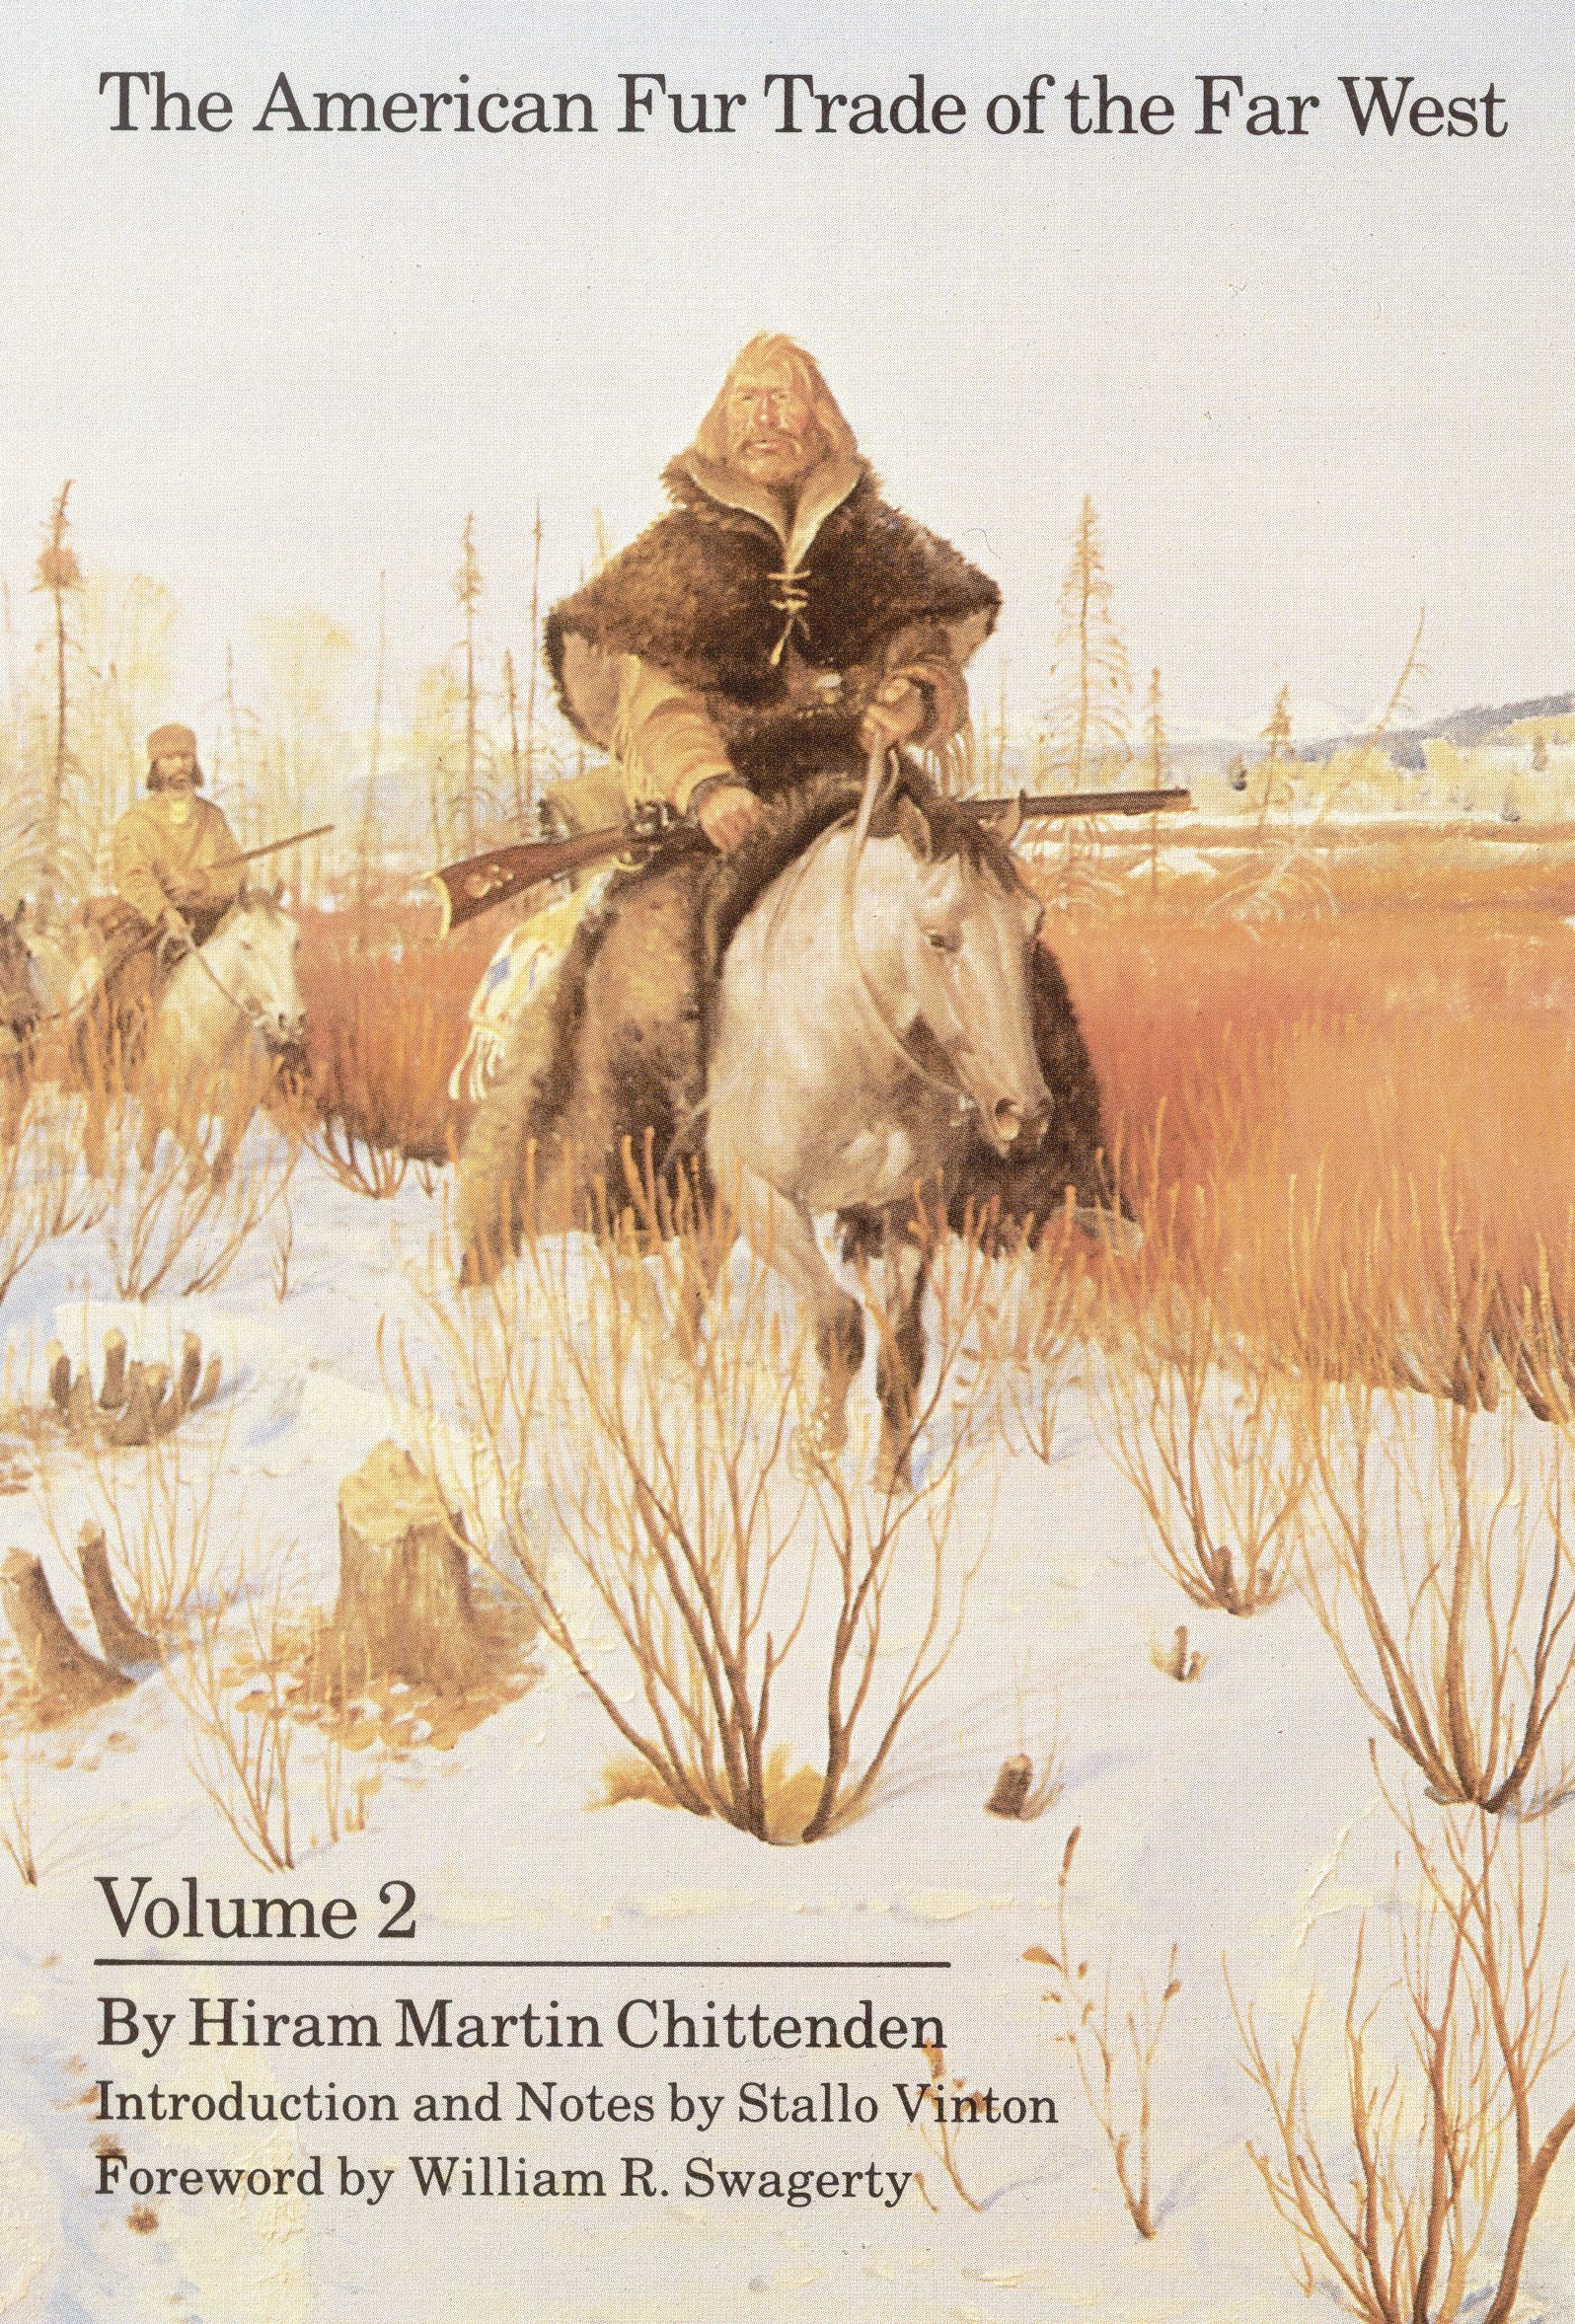 The Archaeology of the North American Fur Trade by Michael S. Nassaney